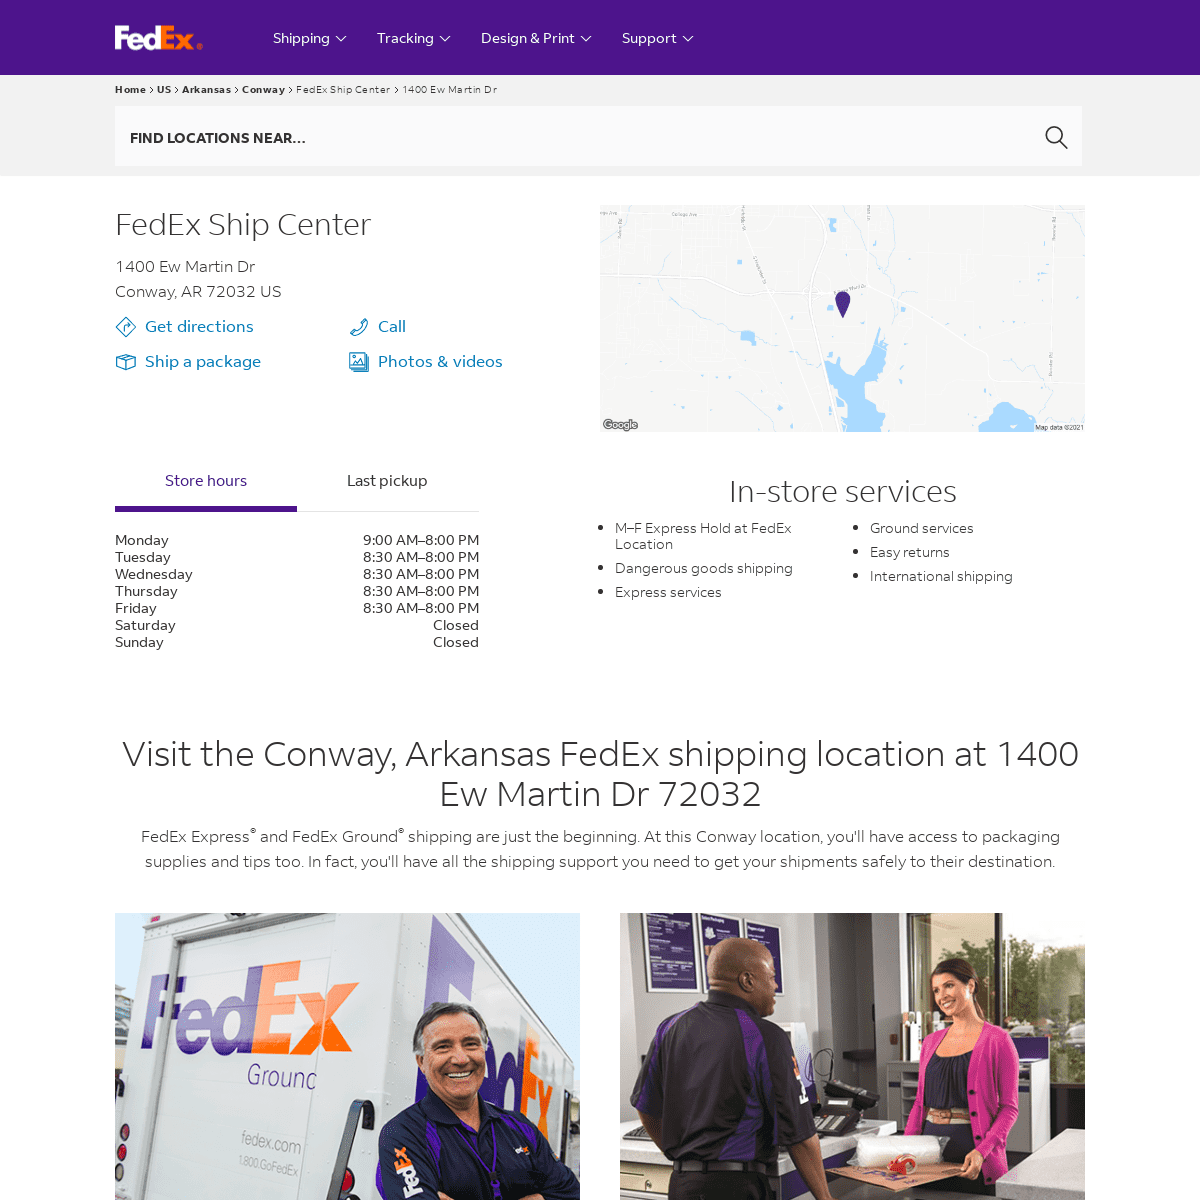 A complete backup of https://local.fedex.com/en-us/ar/conway/mpja/